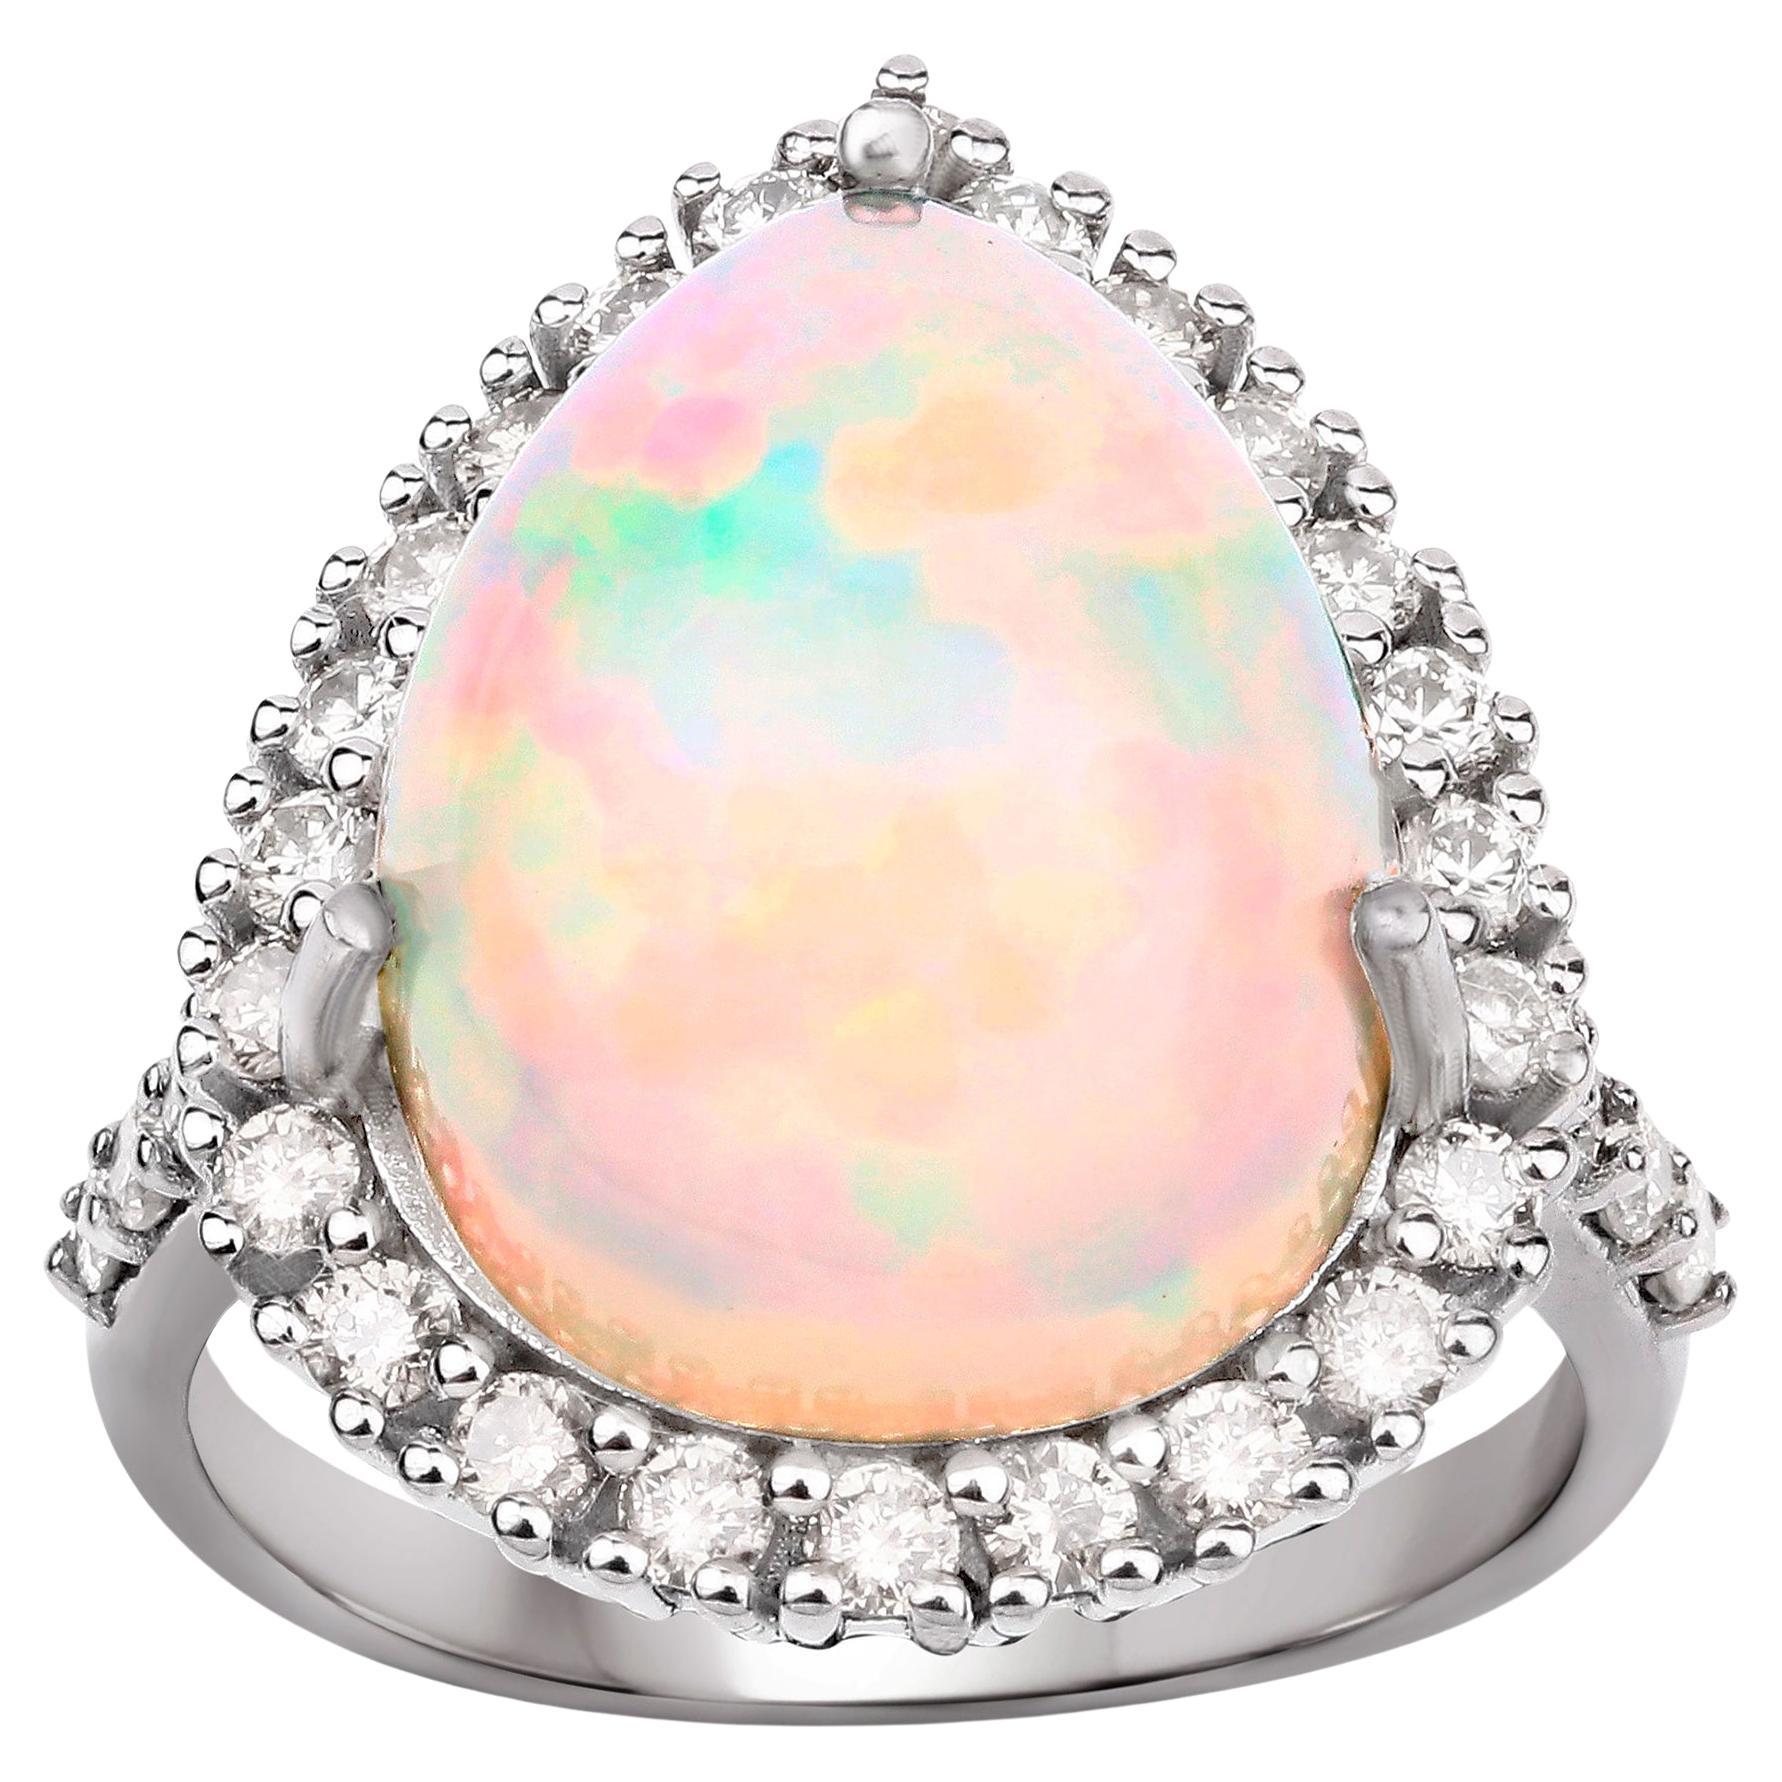 Opal Ring With Diamonds 10.27 Carats Rhodium Plated Sterling Silver